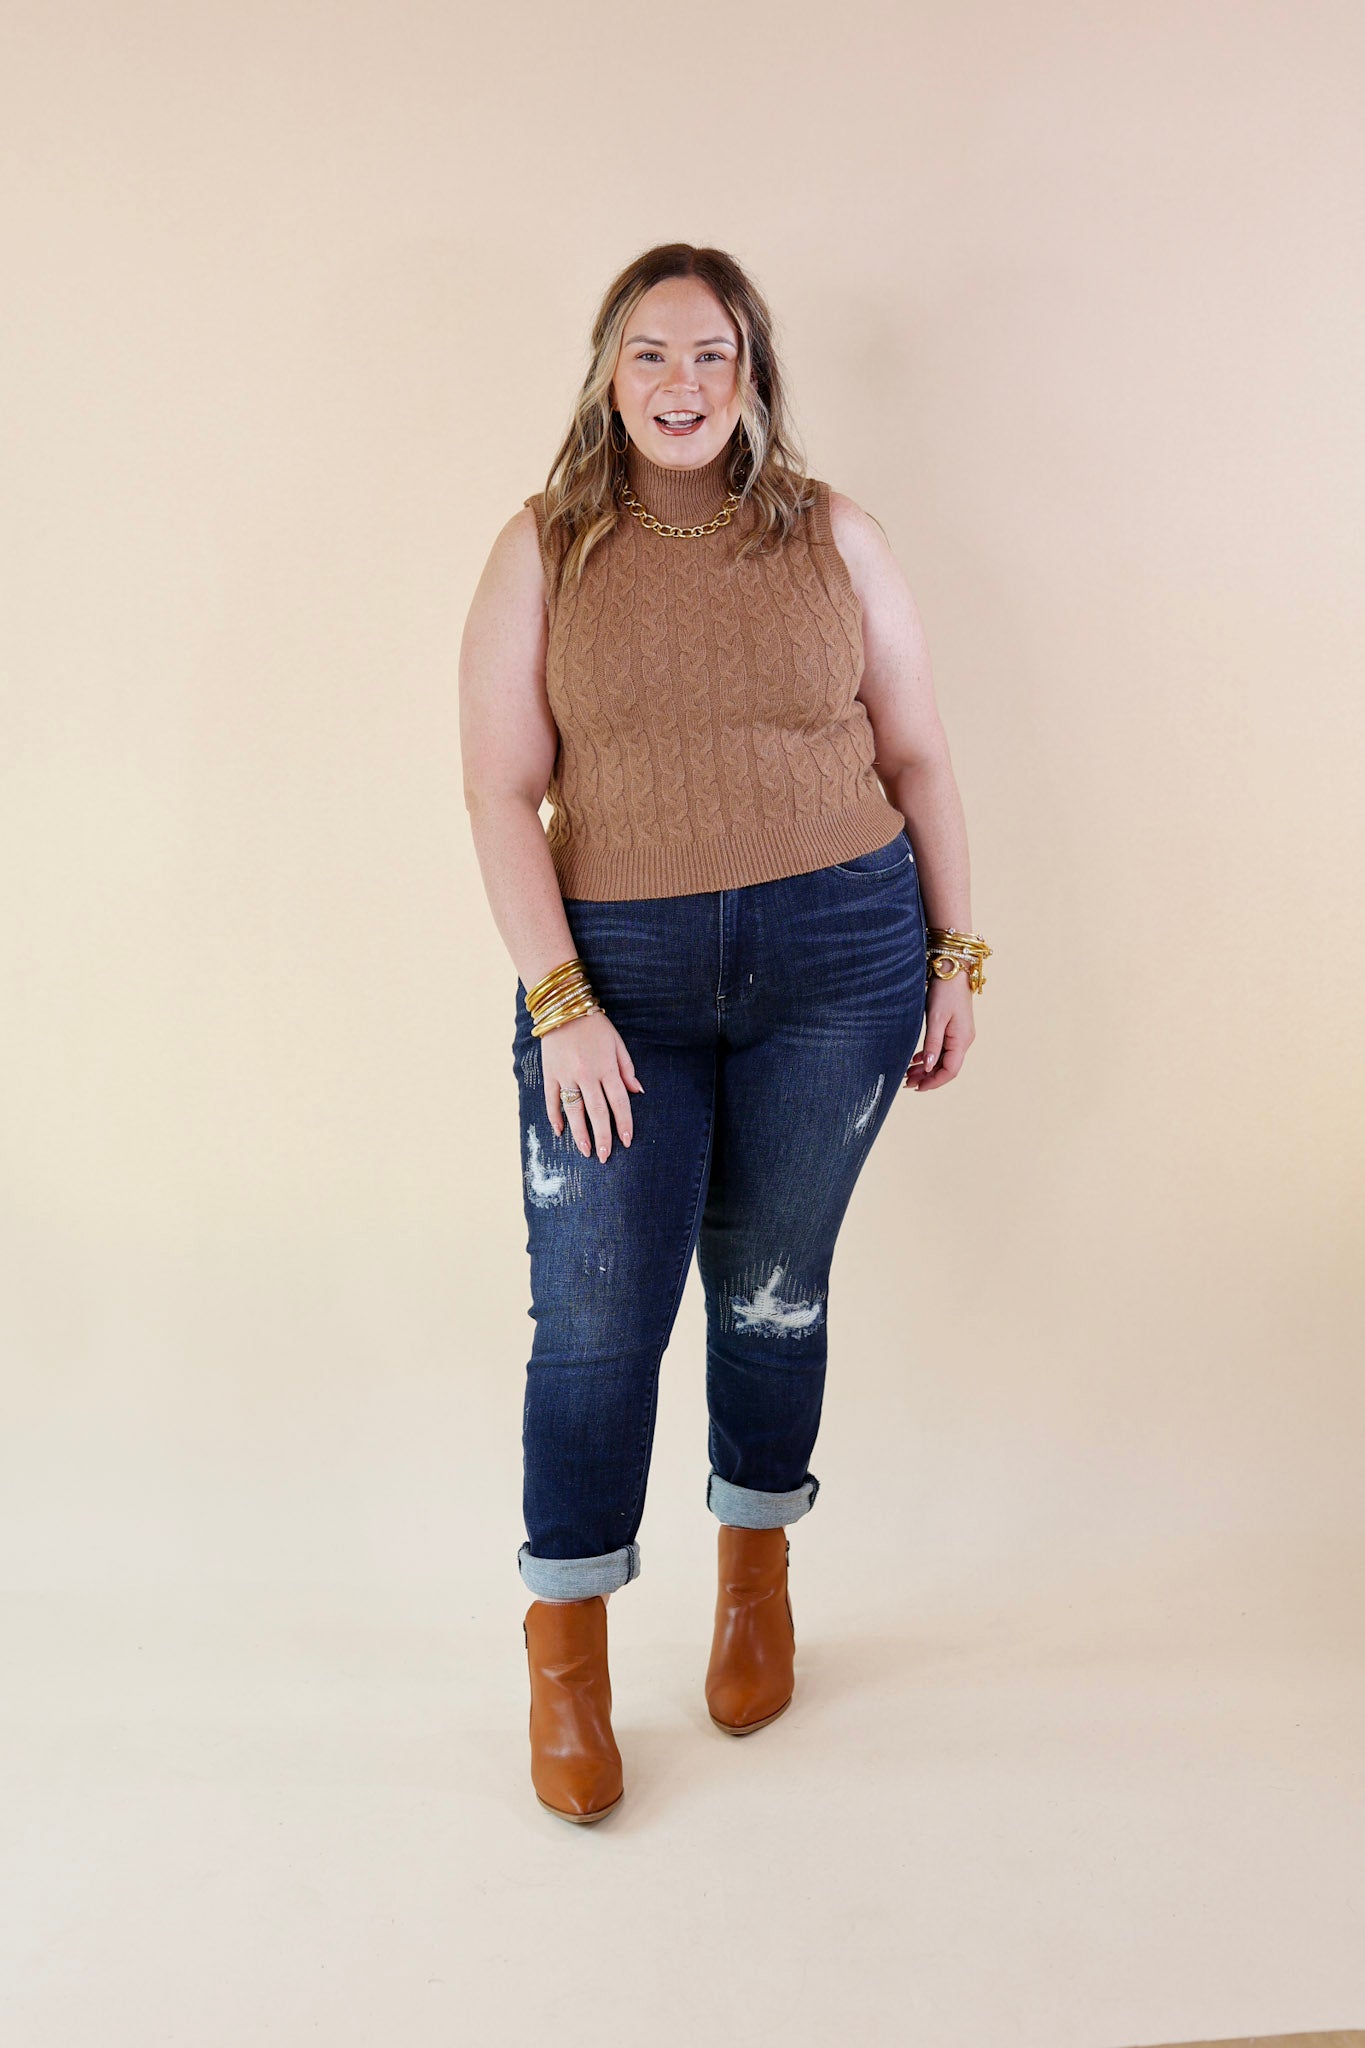 Cider Sips Cropped Sweater Tank Top with High Neck in Camel Brown - Giddy Up Glamour Boutique